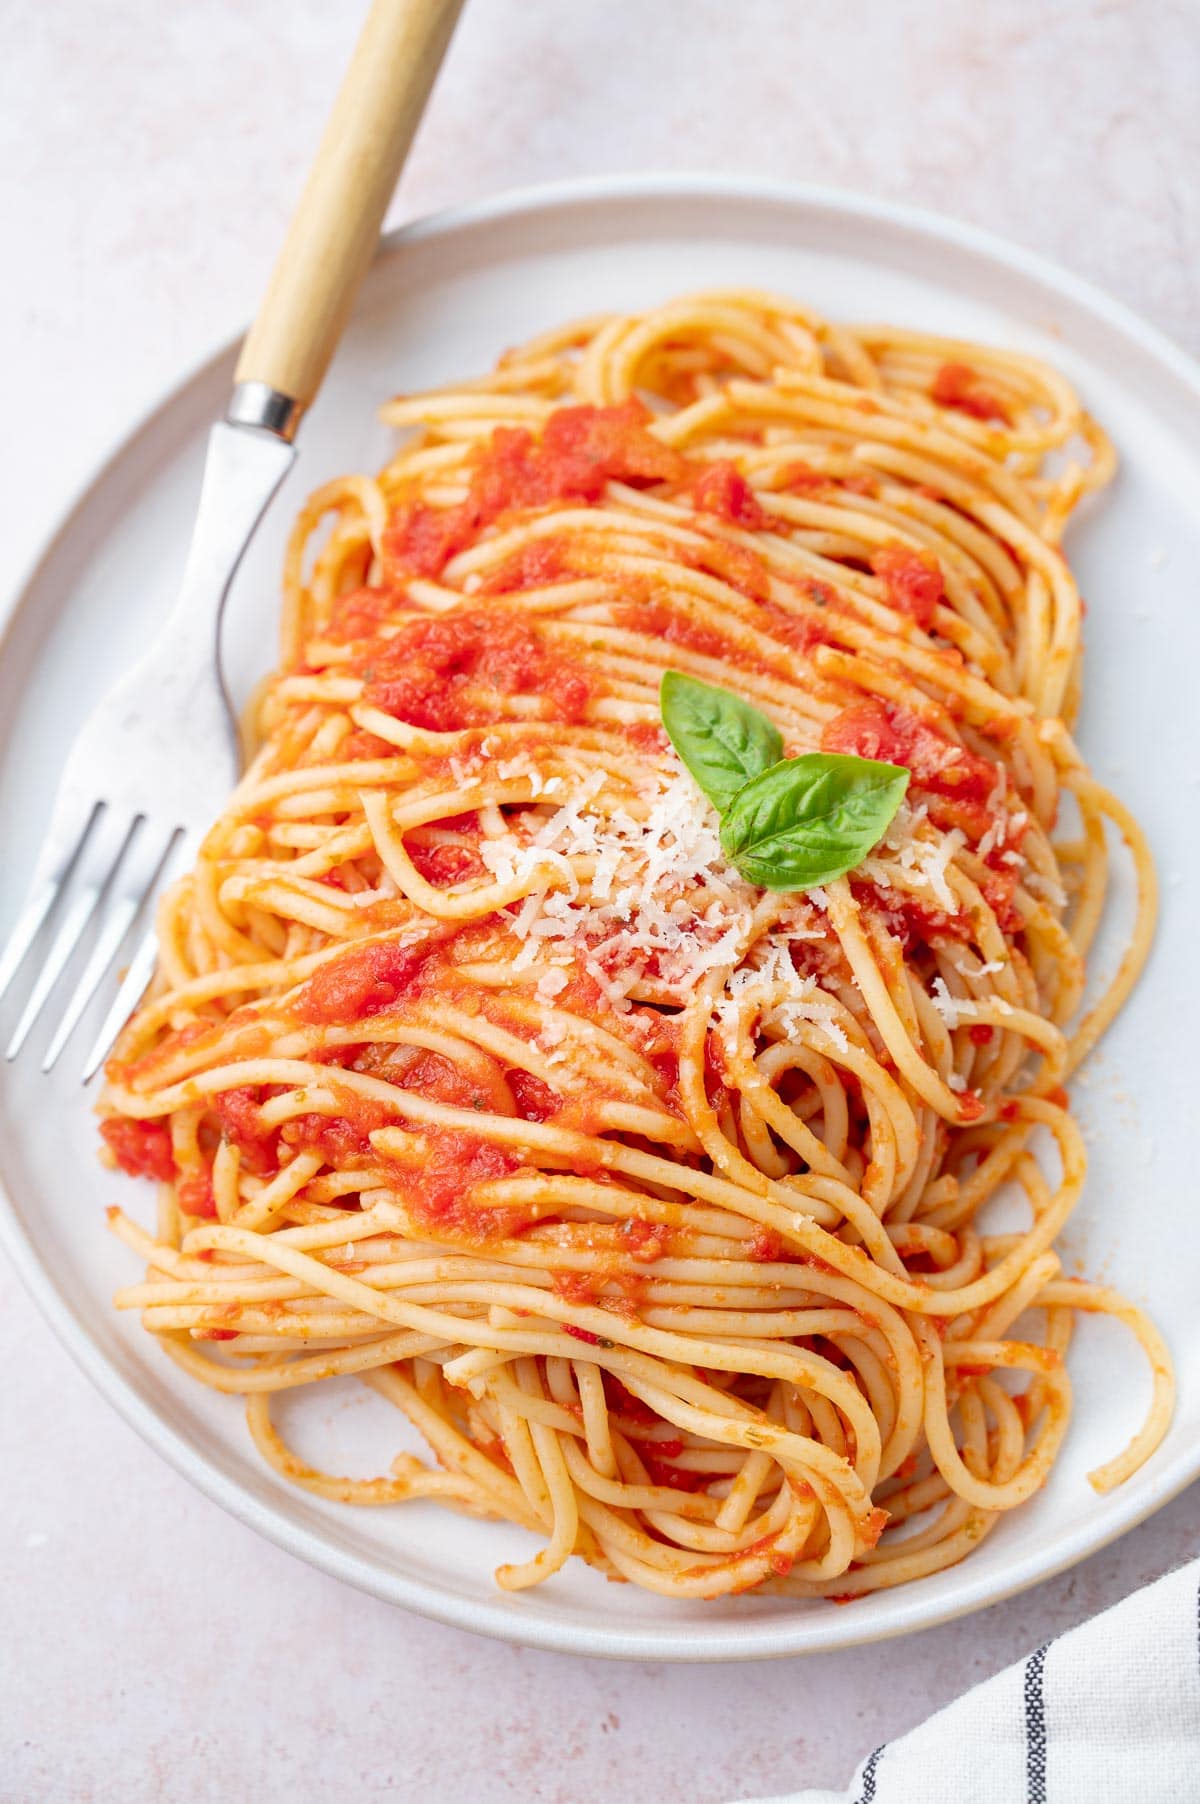 https://www.everyday-delicious.com/wp-content/uploads/2022/09/spaghetti-pomodoro-from-the-bear-everyday-delicious-1.jpg